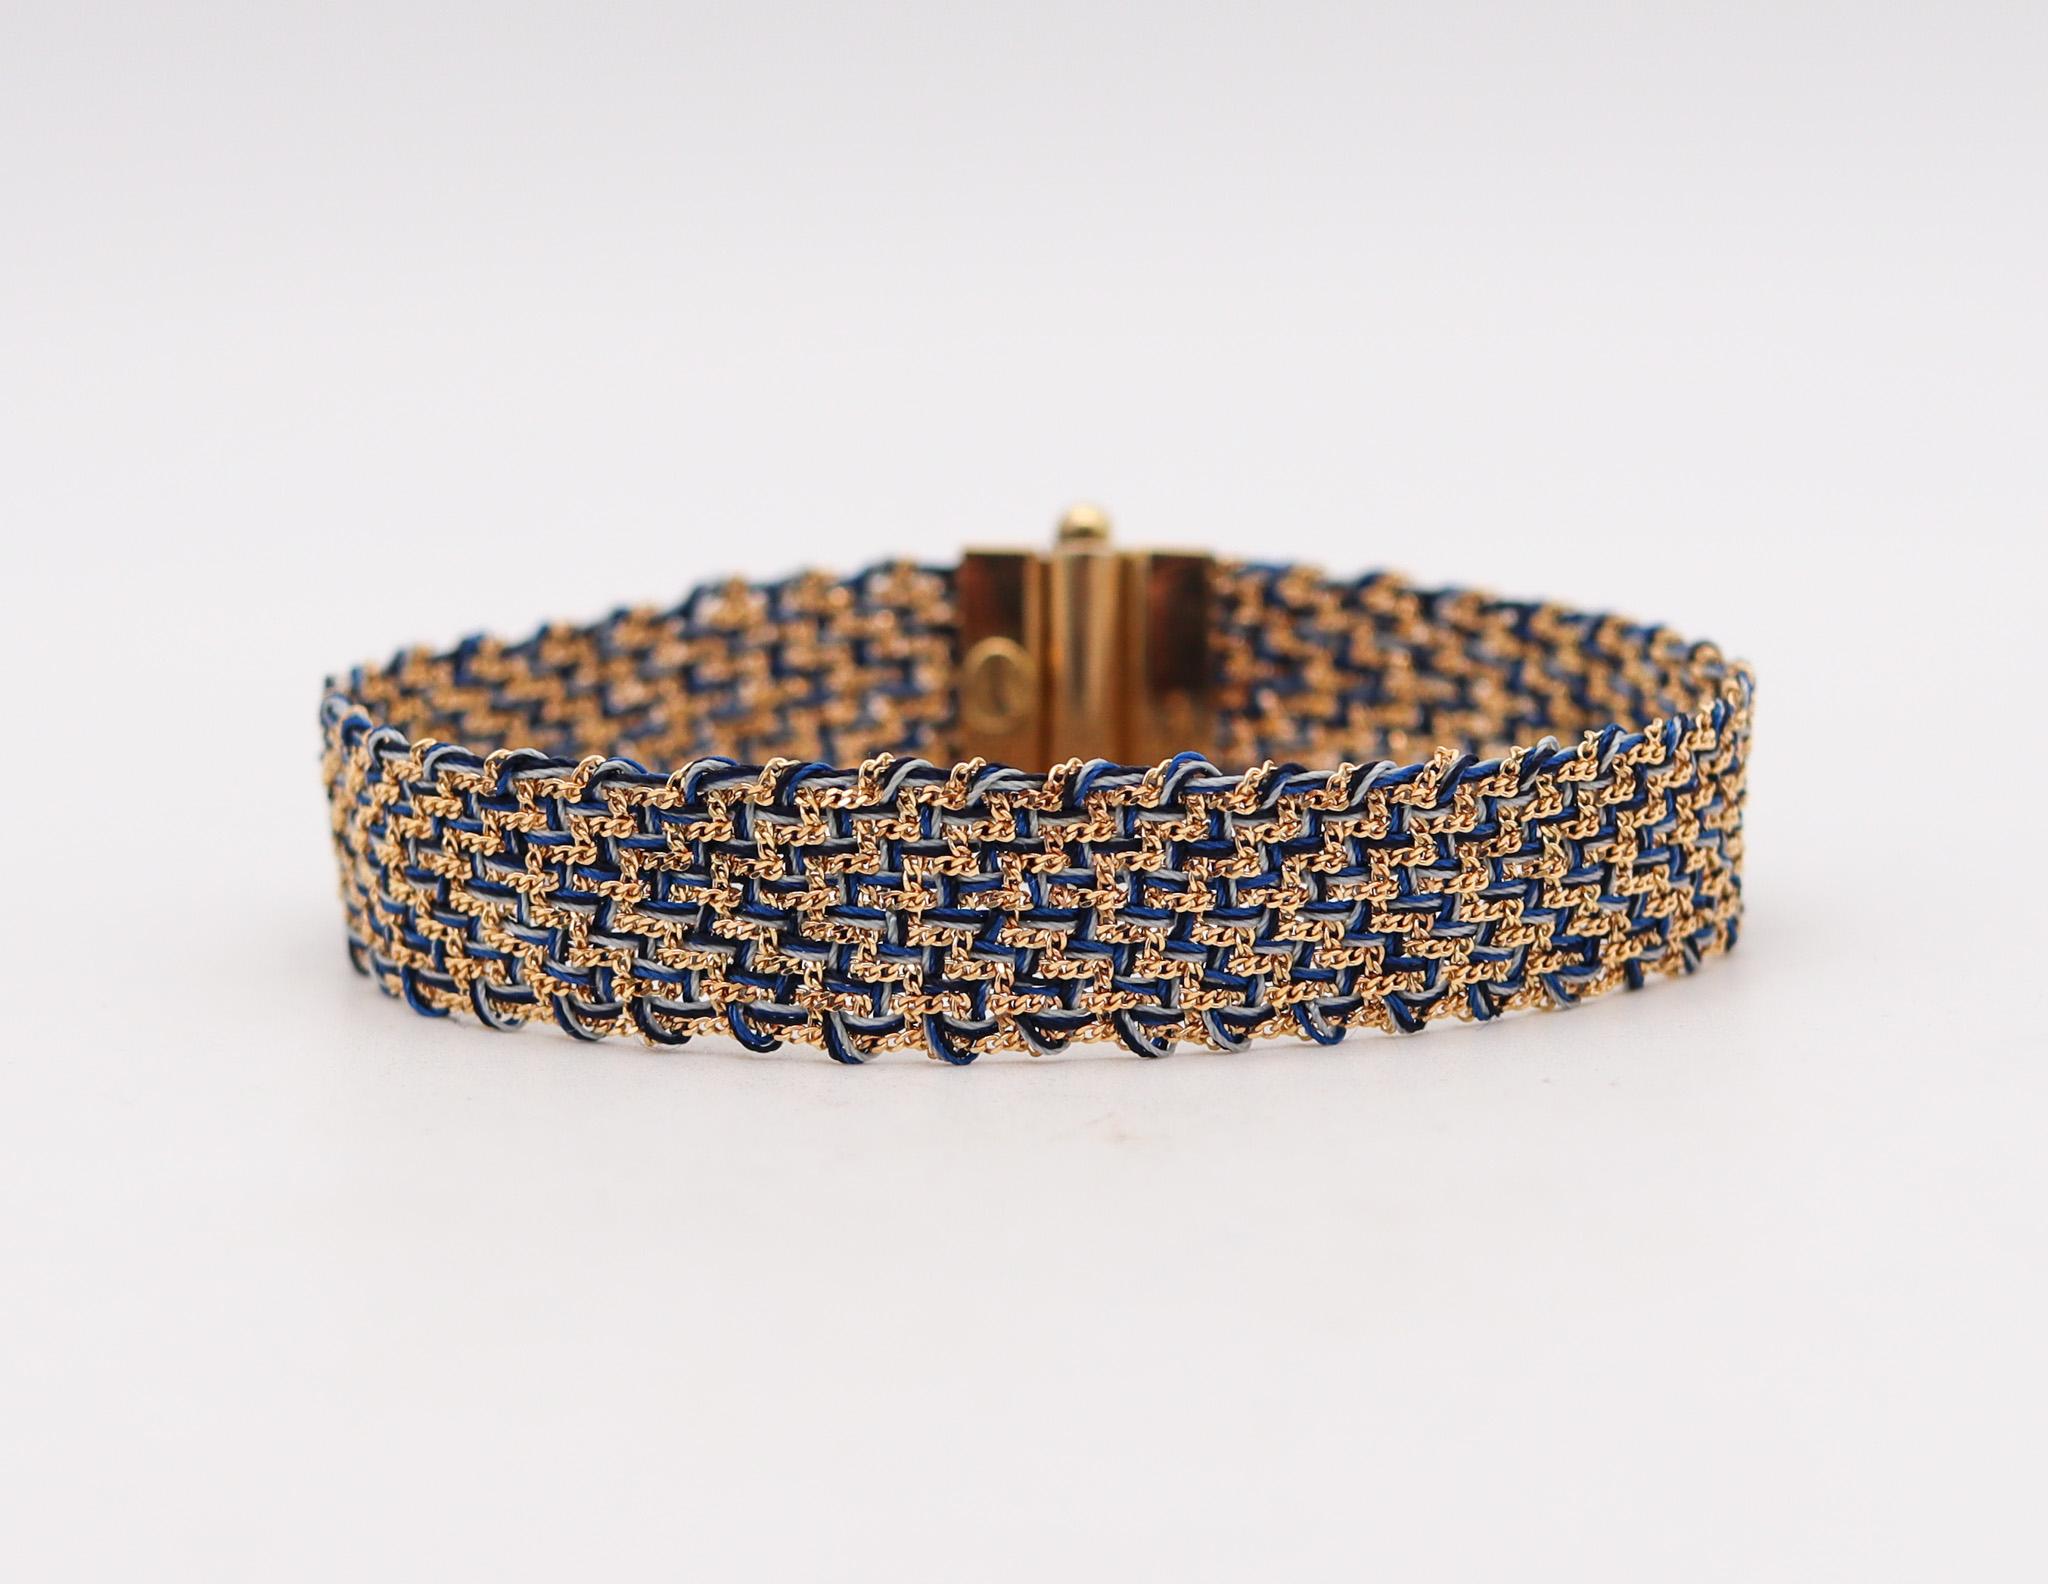 Woven thread wrap bracelet designed by Carolina Bucci.

Beautiful iconic thread bracelet, created in Firenze Italy by the jewelry designer Carolina Bucci. It was crafted from woven blue silk and yellow gold of 18 karats, with high polished finish.